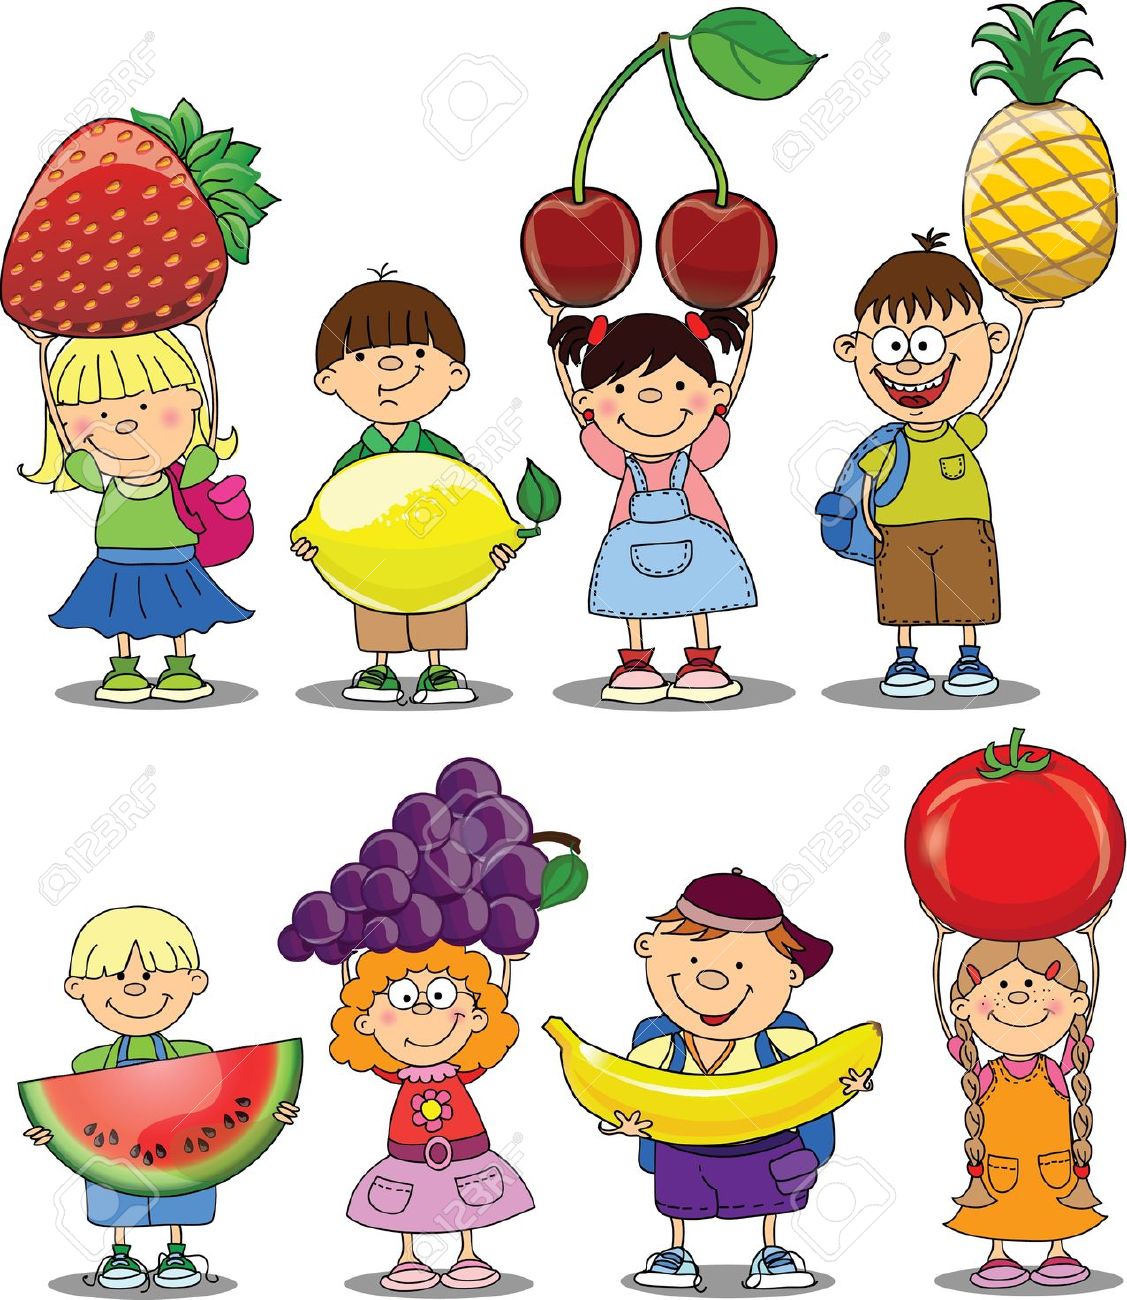 healthy-food-clipart-free-download-on-clipartmag